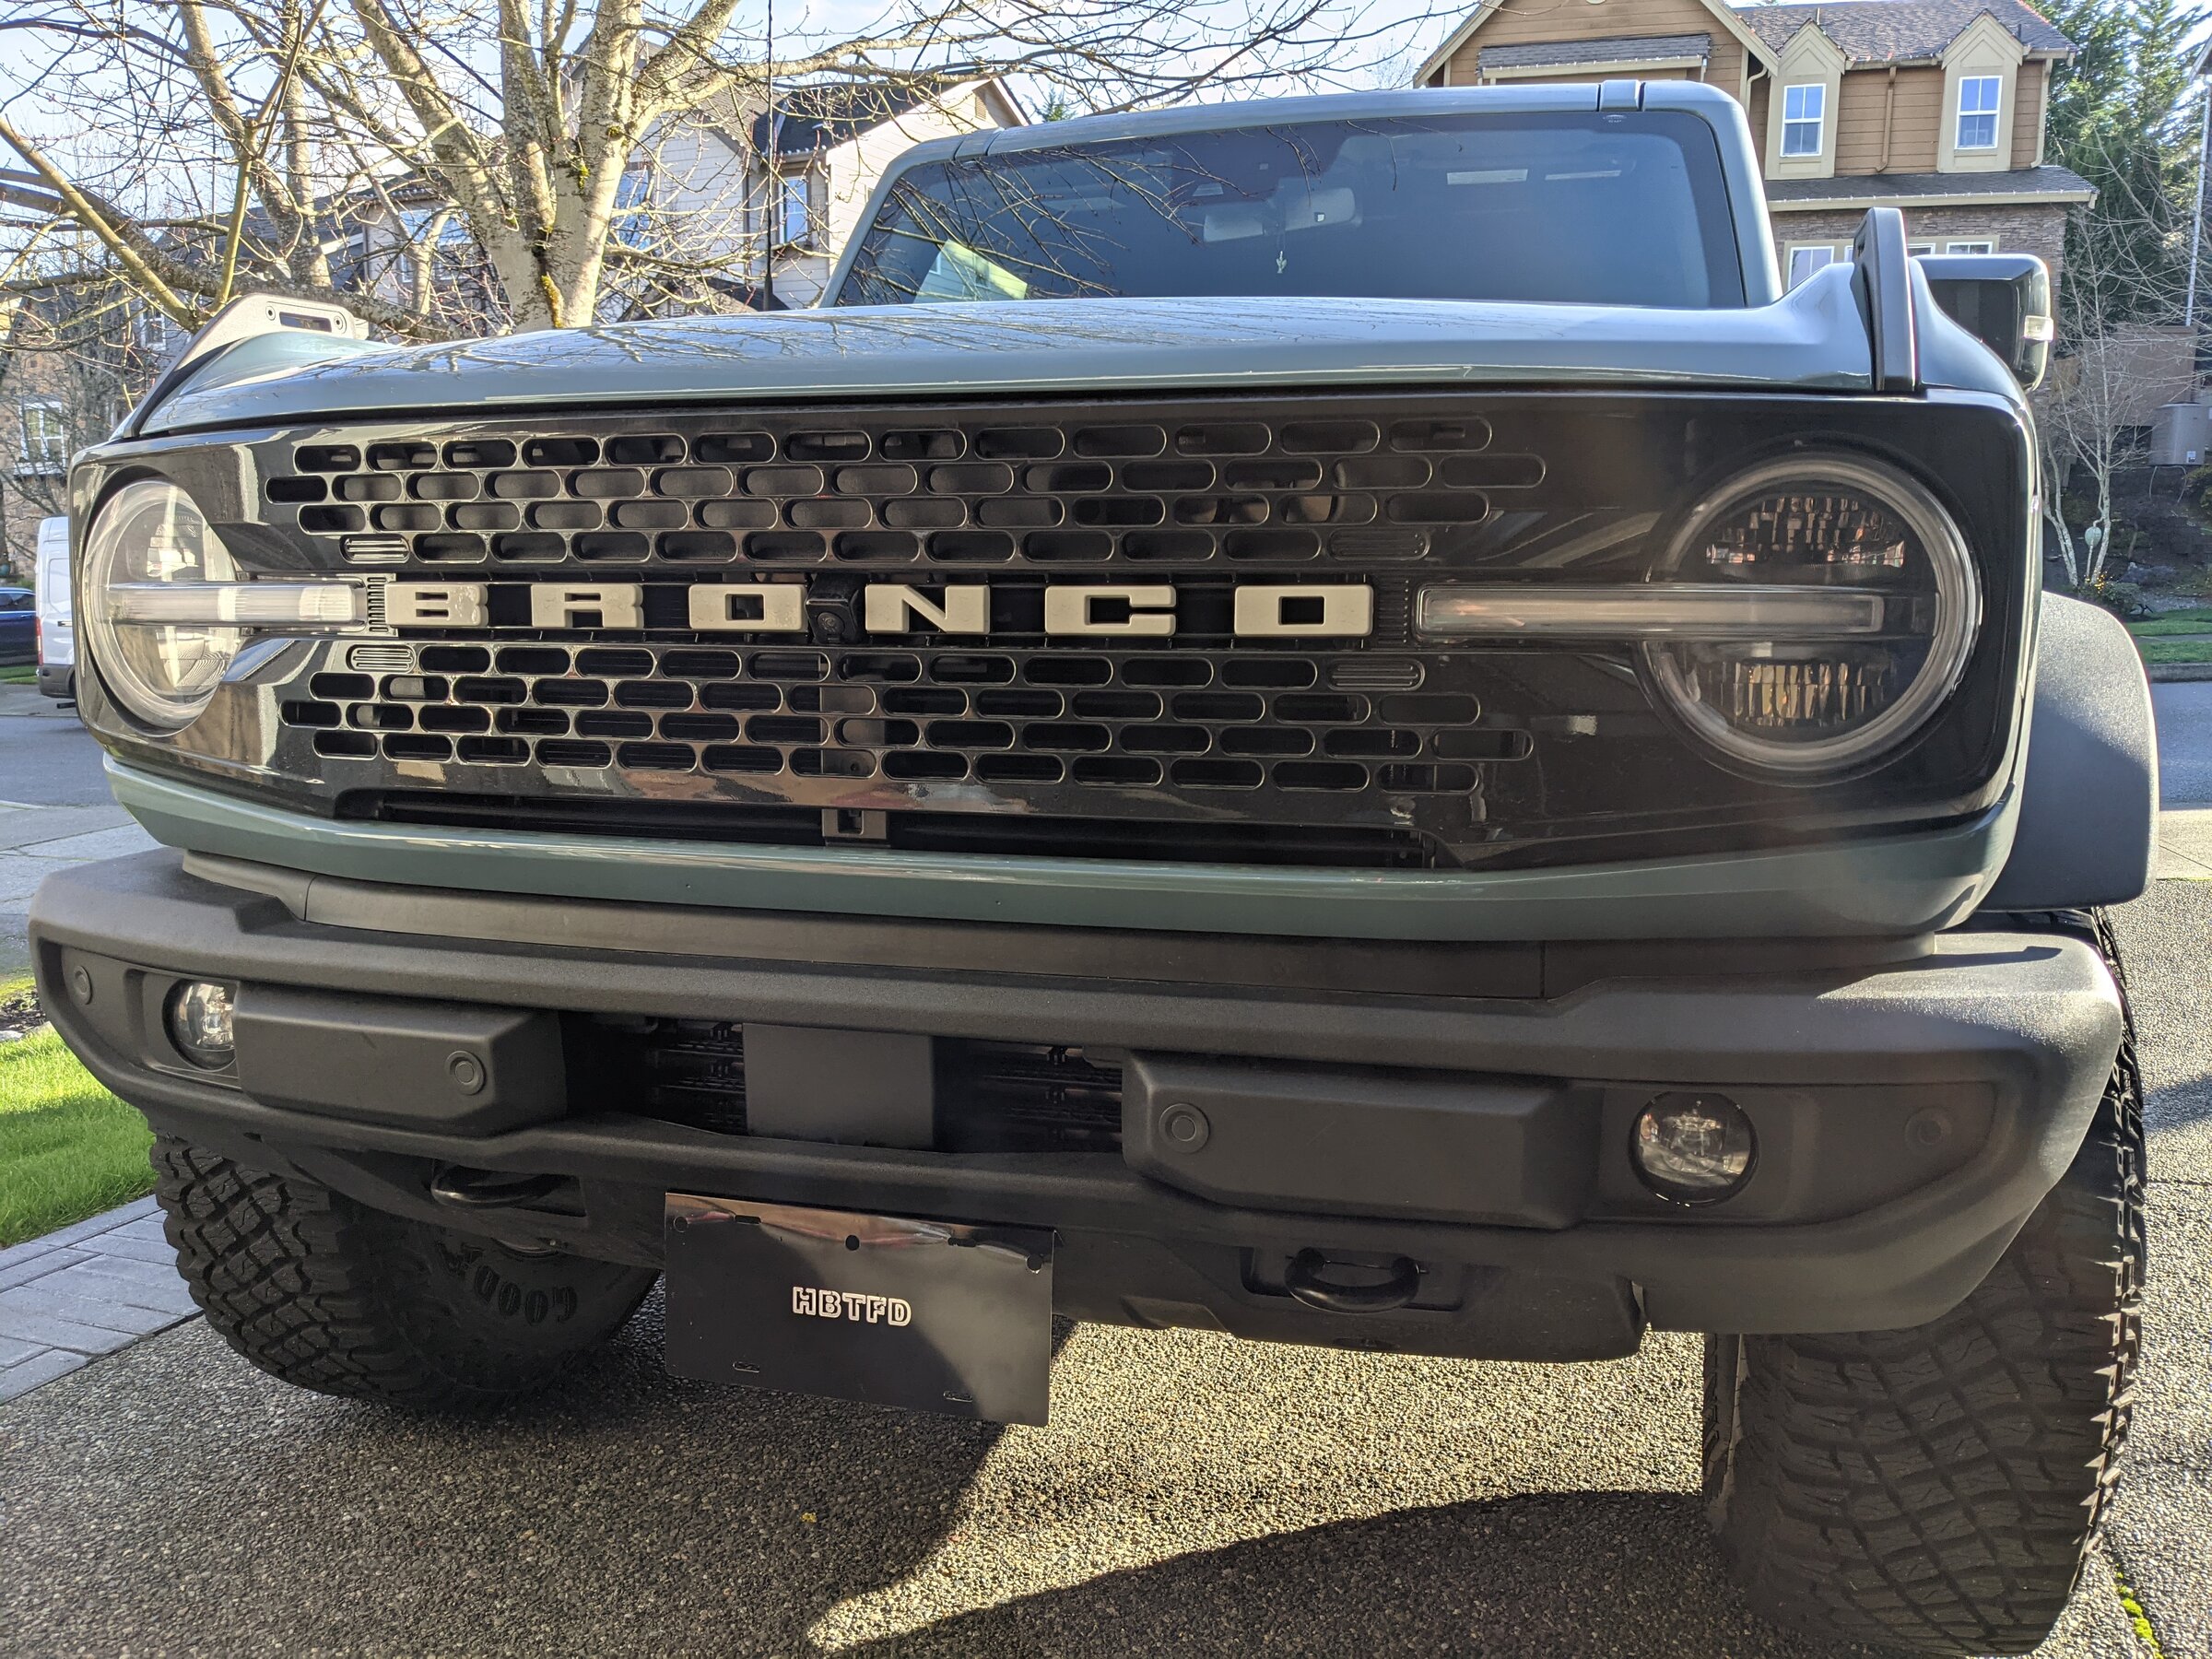 Ford Bronco PRICE DROP - Finally a Front License Plate bracket solution - order yours today 00A6B164-BAA8-4E51-AC02-2C97FCC38D68